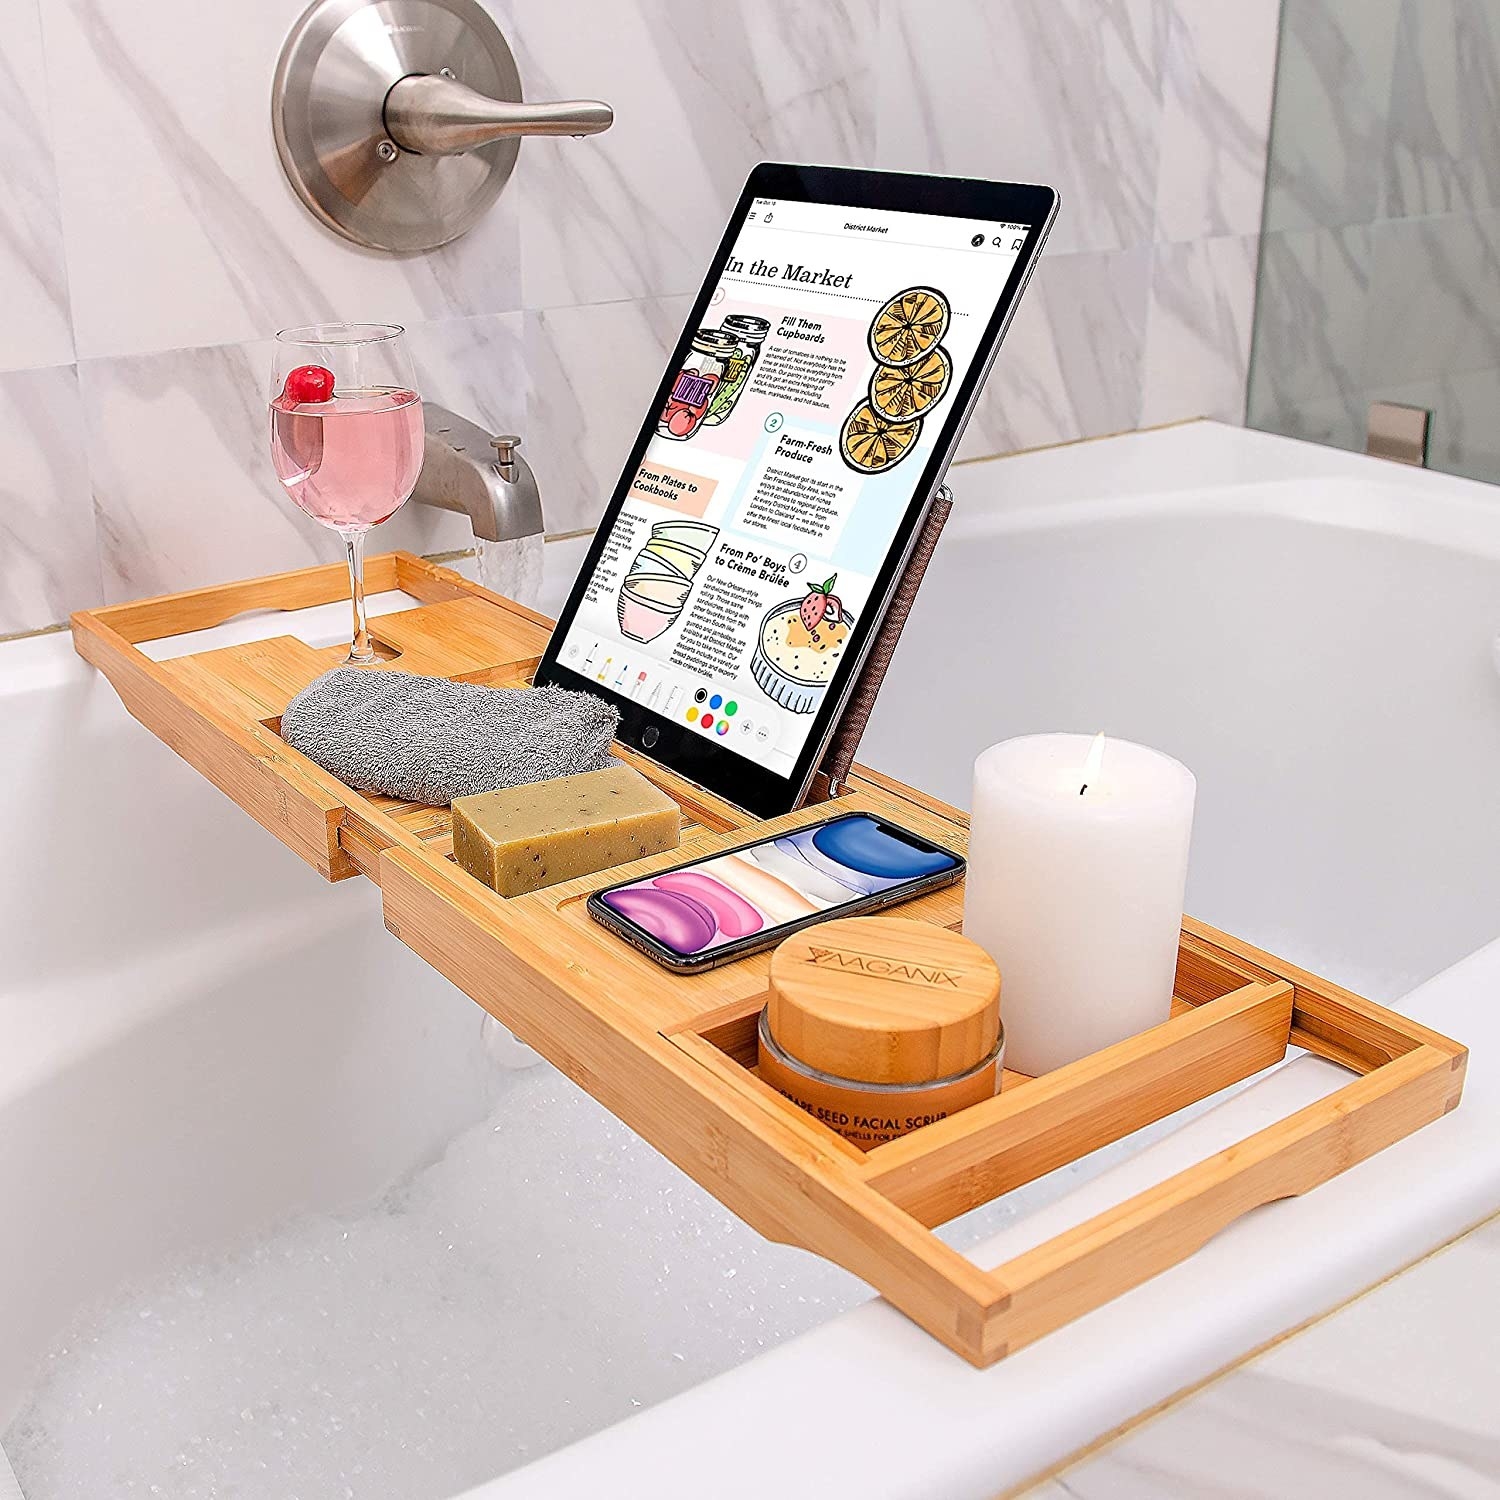 The wooden bath tray holding a tablet, wine glass, phone, candle, soap, face scrub, and small towel